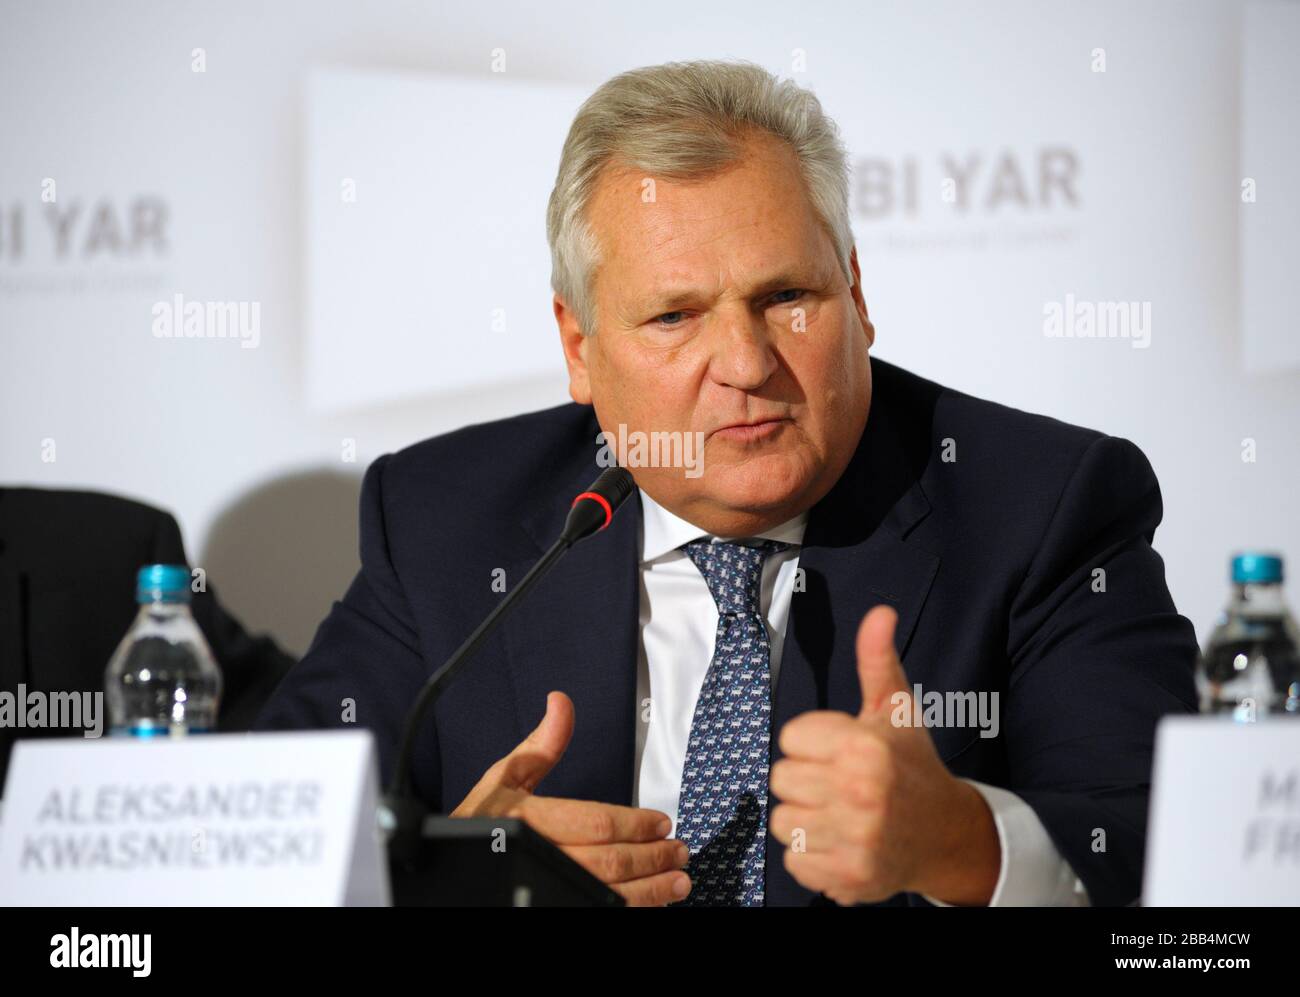 Aleksander Kwasniewski the former President of Poland, keeping speech during press-conference devoted to Memorial center of Holocaust Babi Yar Stock Photo